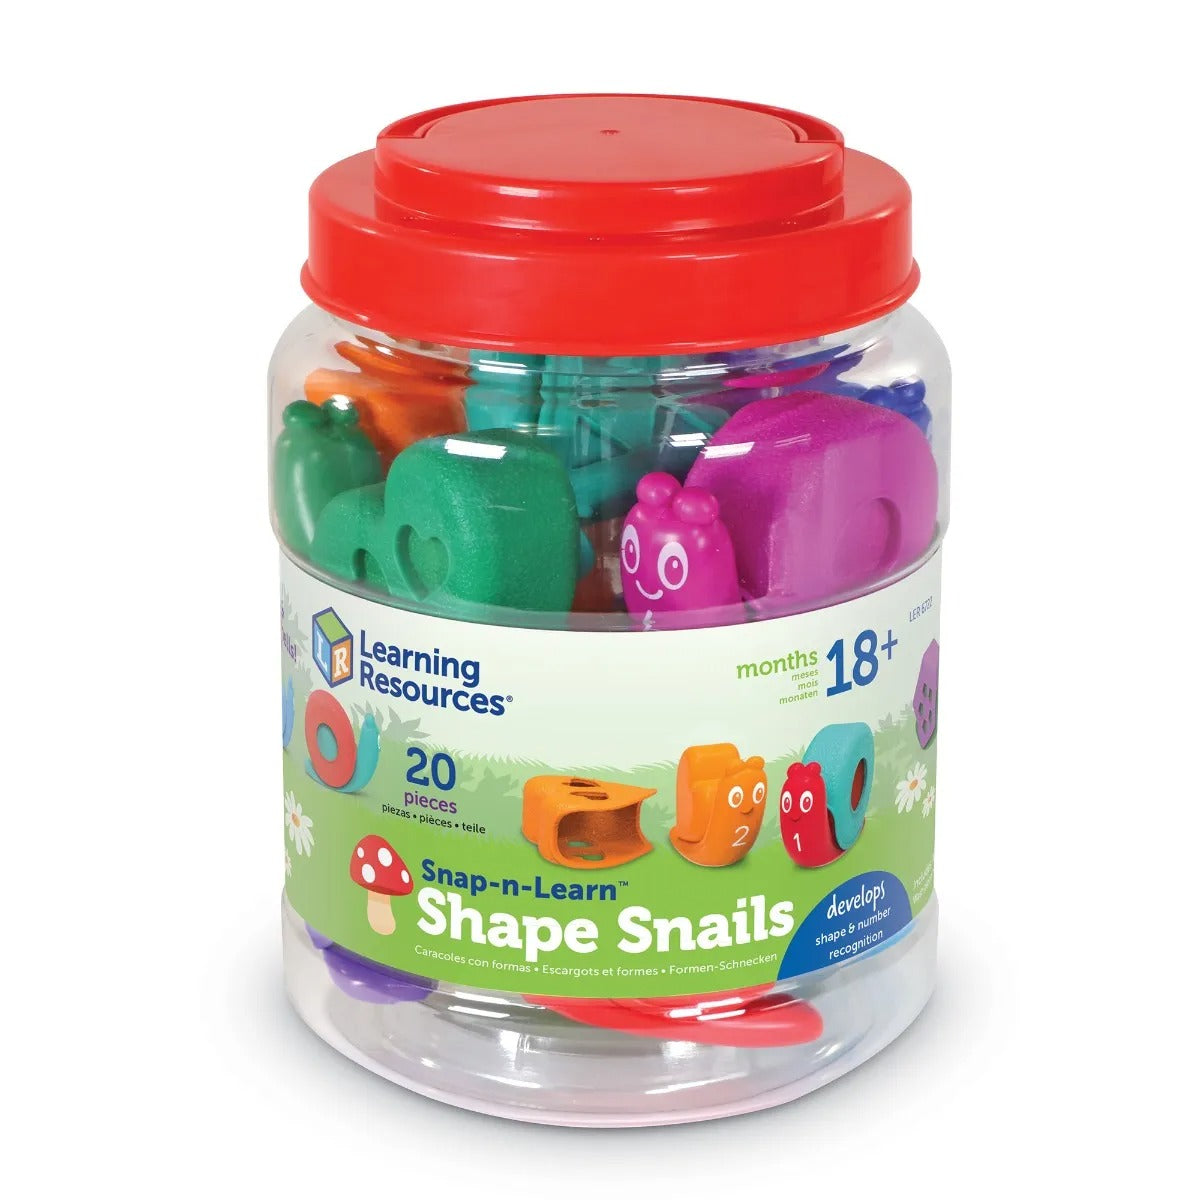 Snap-N-Learn Shape Snails, These friendly Snap-n-Learn snails carry a load of learning on their backs! This colourful 20-piece set includes 10 numbered snails, each with a removable shape shell. There are three ways to learn with these friendly snails: count 1-10; match the shape shells; and learn about colours! As children remove and reposition the tactile shells, they also build hand strength and fine motor skills. When the learning fun is done, the snails store in the convenient storage tub with carry ha